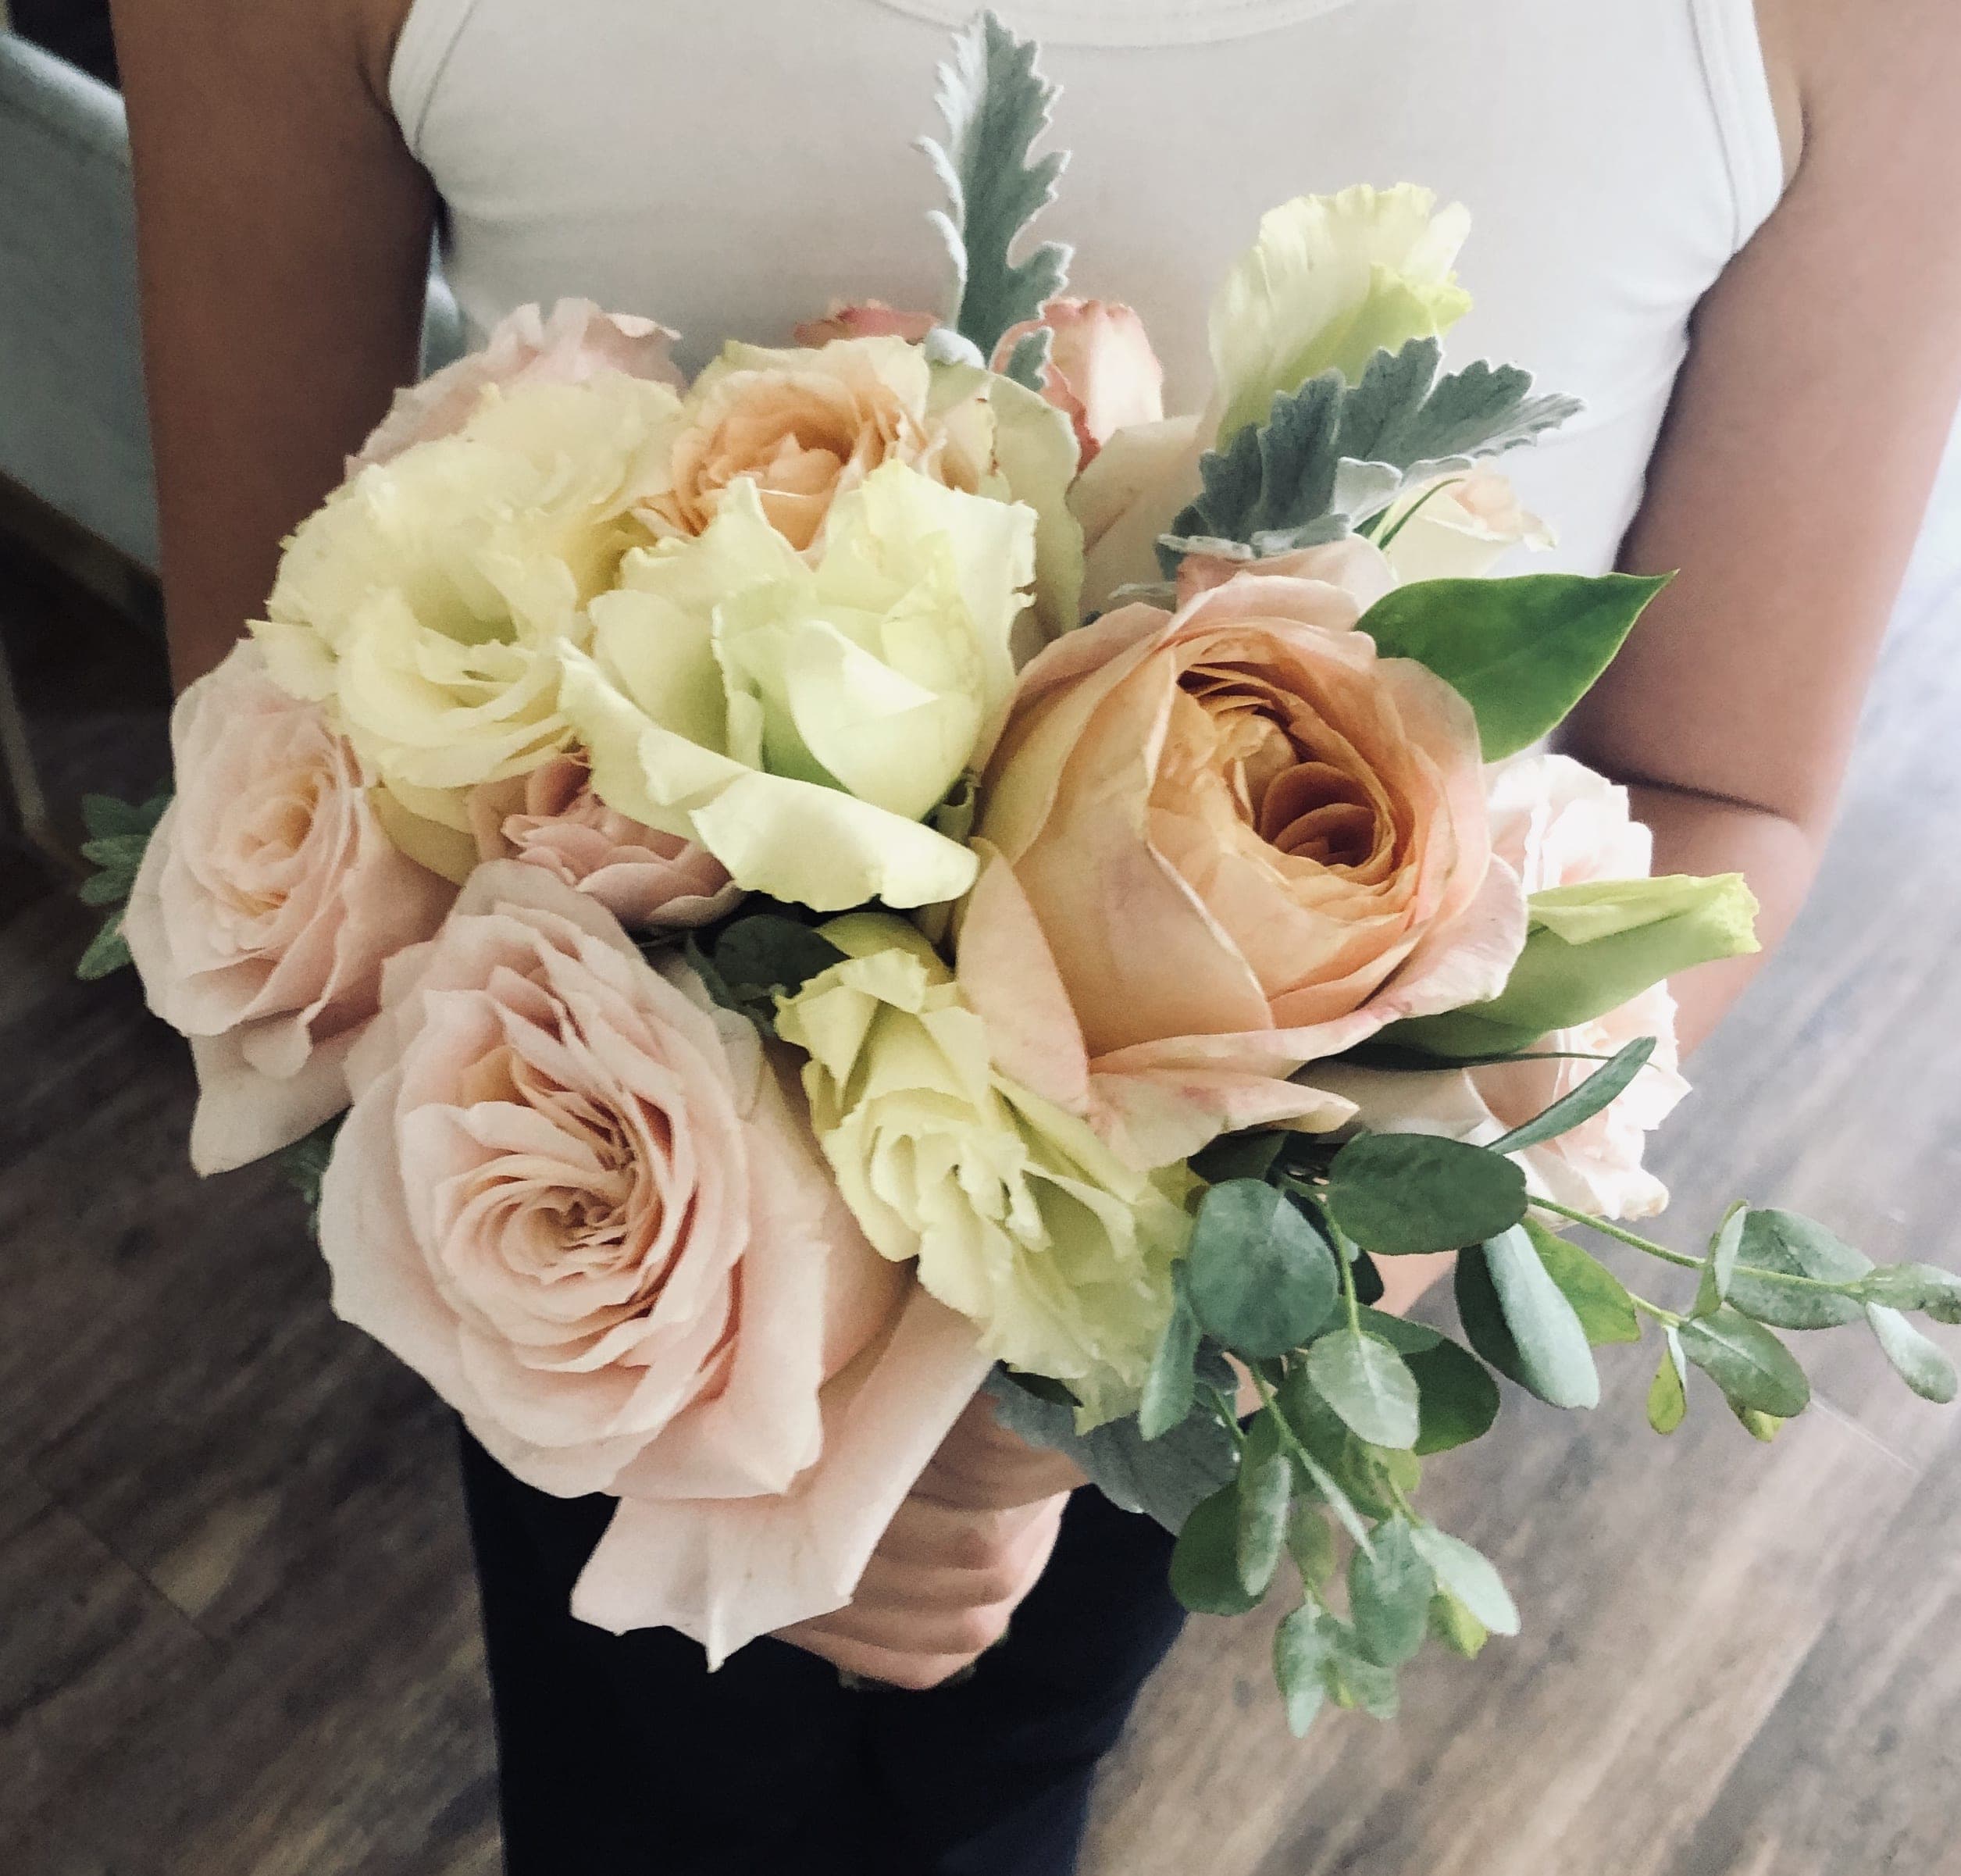  Brides maid Bouquet #EBB2 - Perfect match for bridal bouquet EBB1 soft pastel naturally open garden roses french satin ribbon